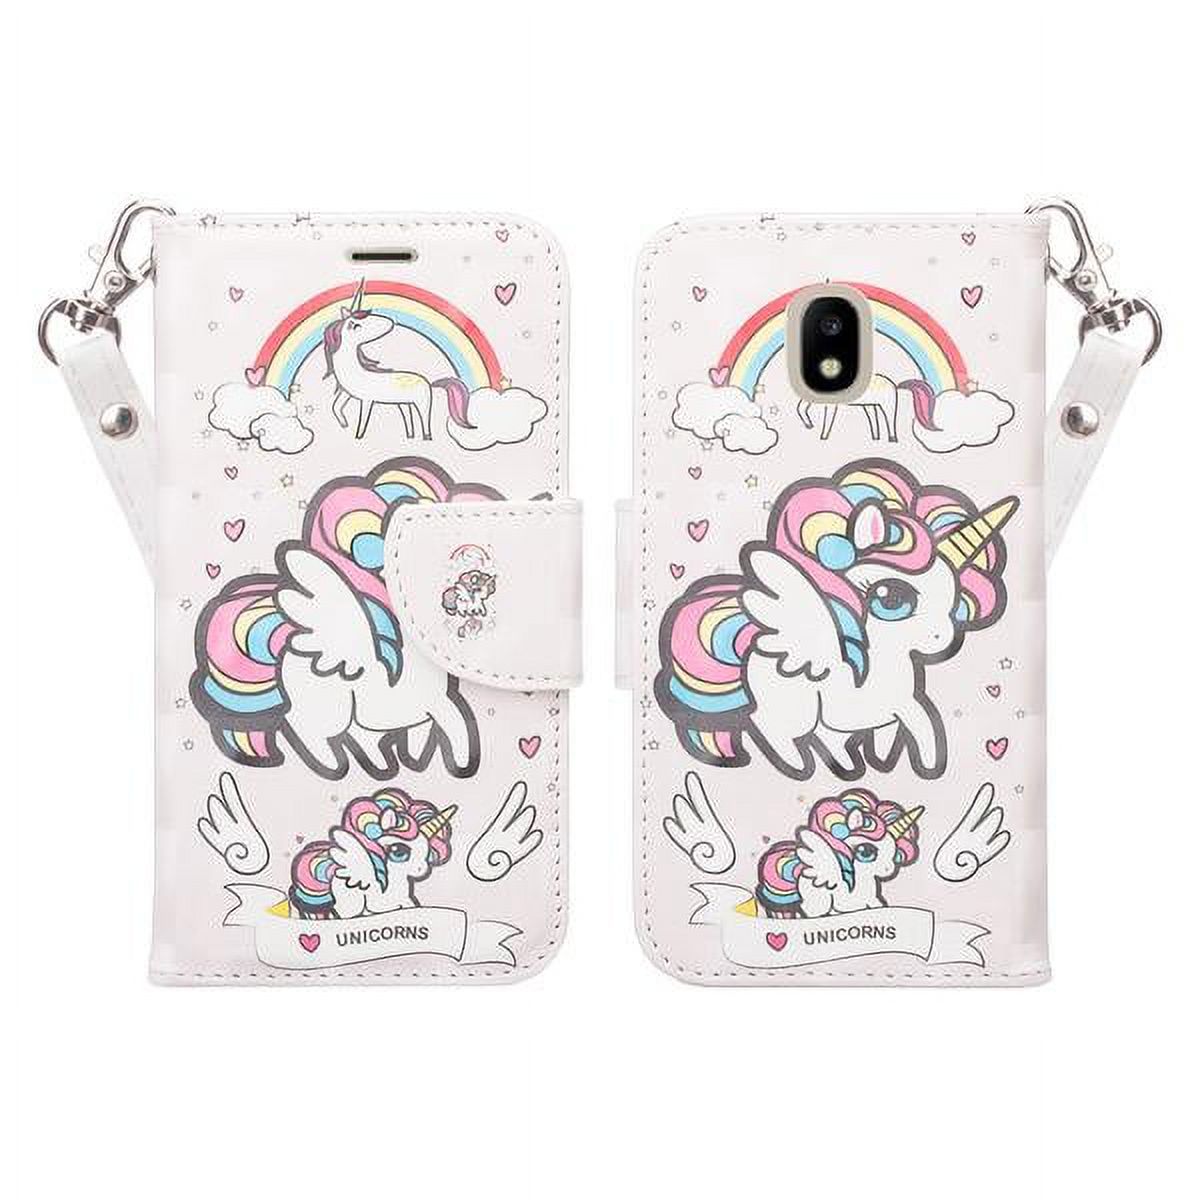 For Tracfone/StraightTalk For Samsung Galaxy J3 Orbit (S367VL) Case Pu Leather Flip Wallet Case [ID&Credit Card Slots] Phone Cases - Unicorn Wings - image 2 of 5